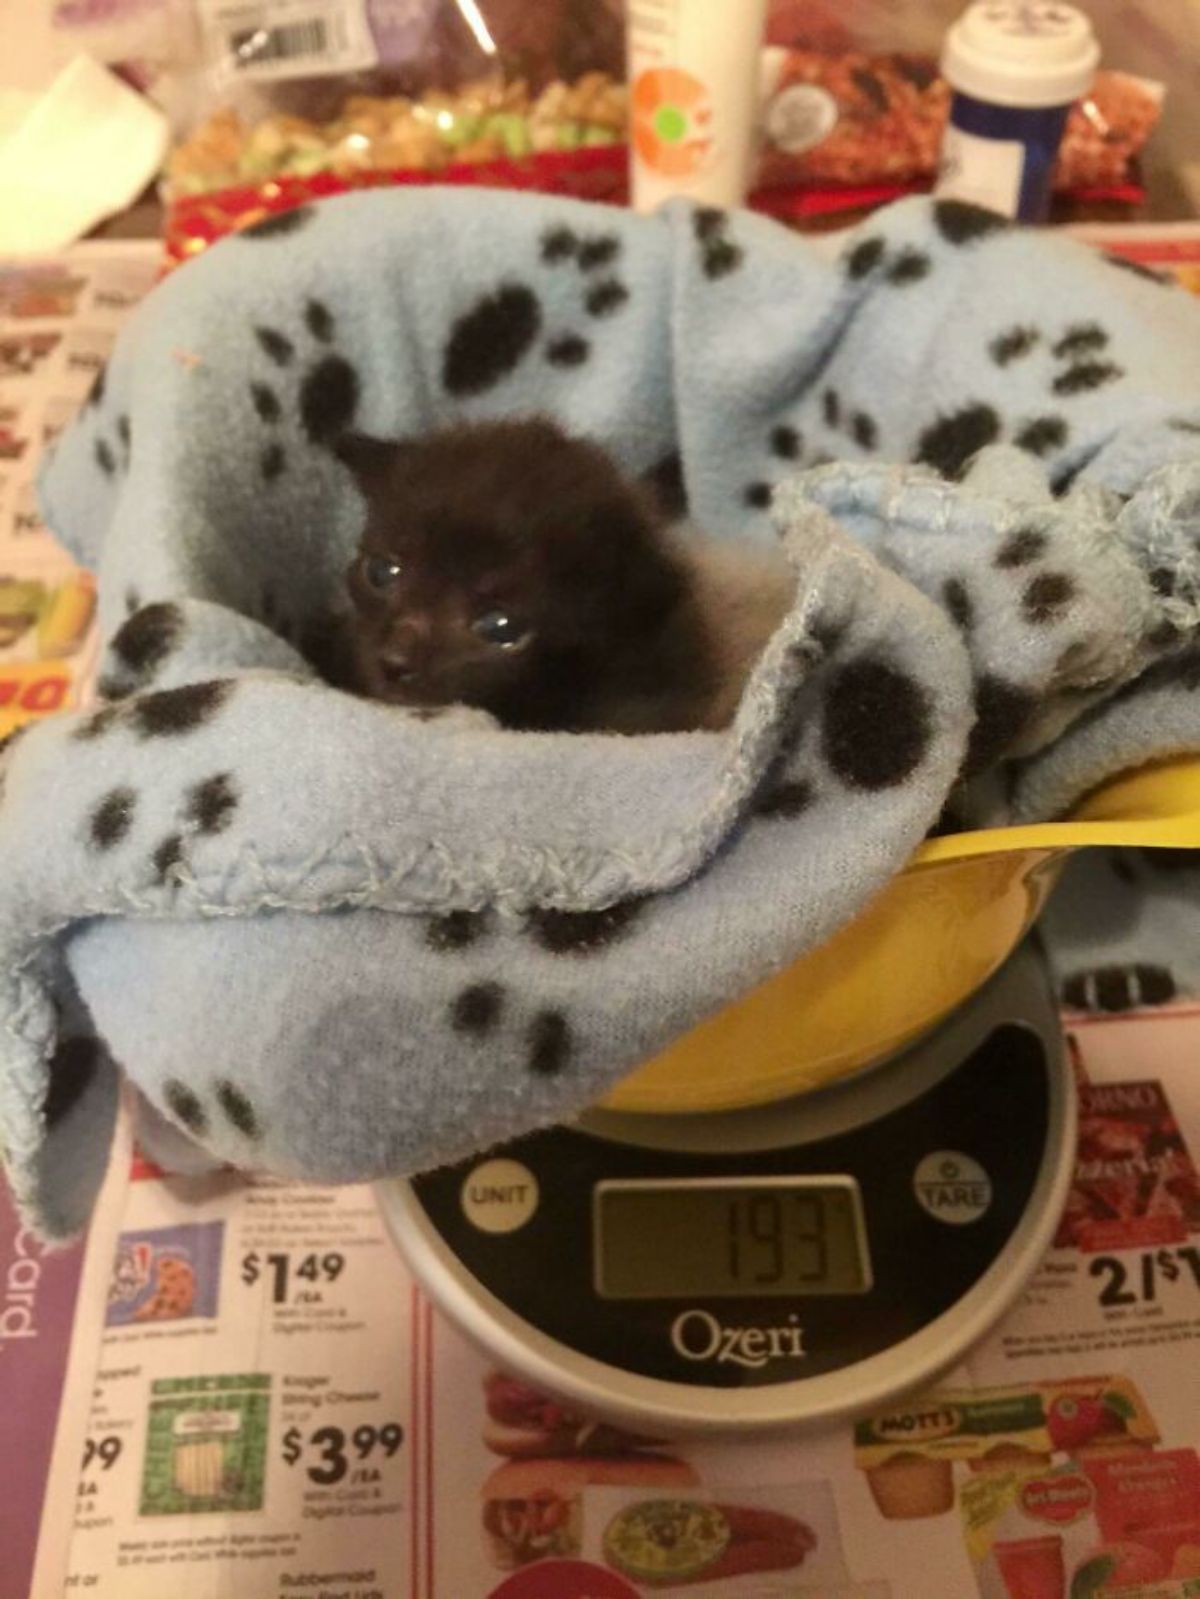 black kitten in a grey and black blanket getting weighed